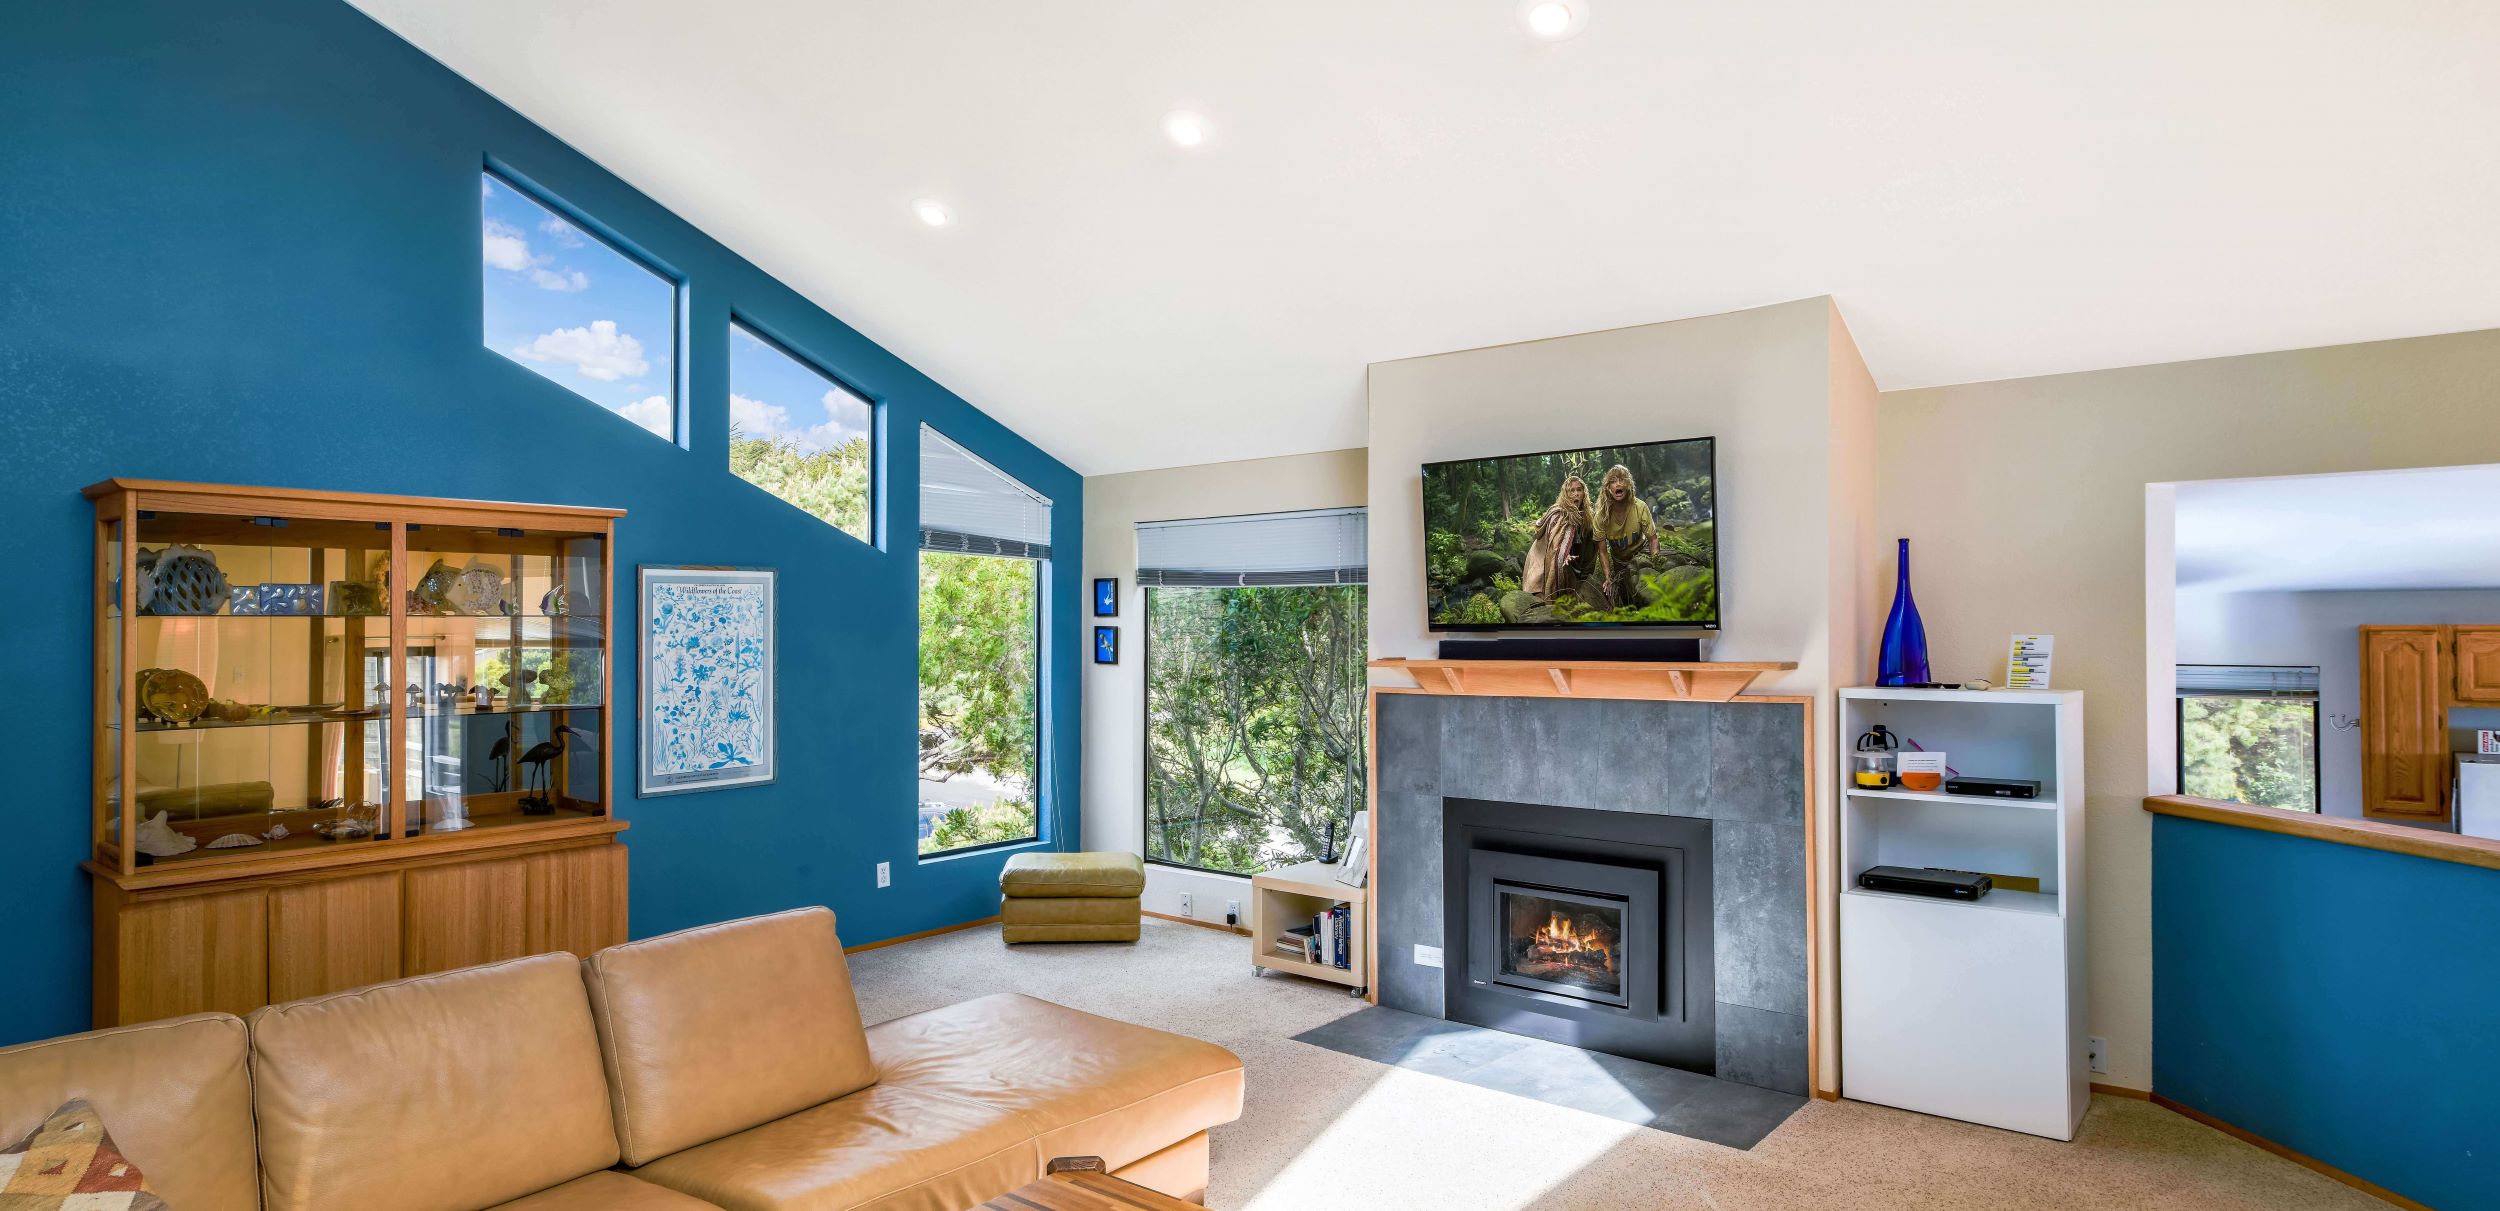 Mare Vista - bright blue walled living room with fireplace and leather couch.